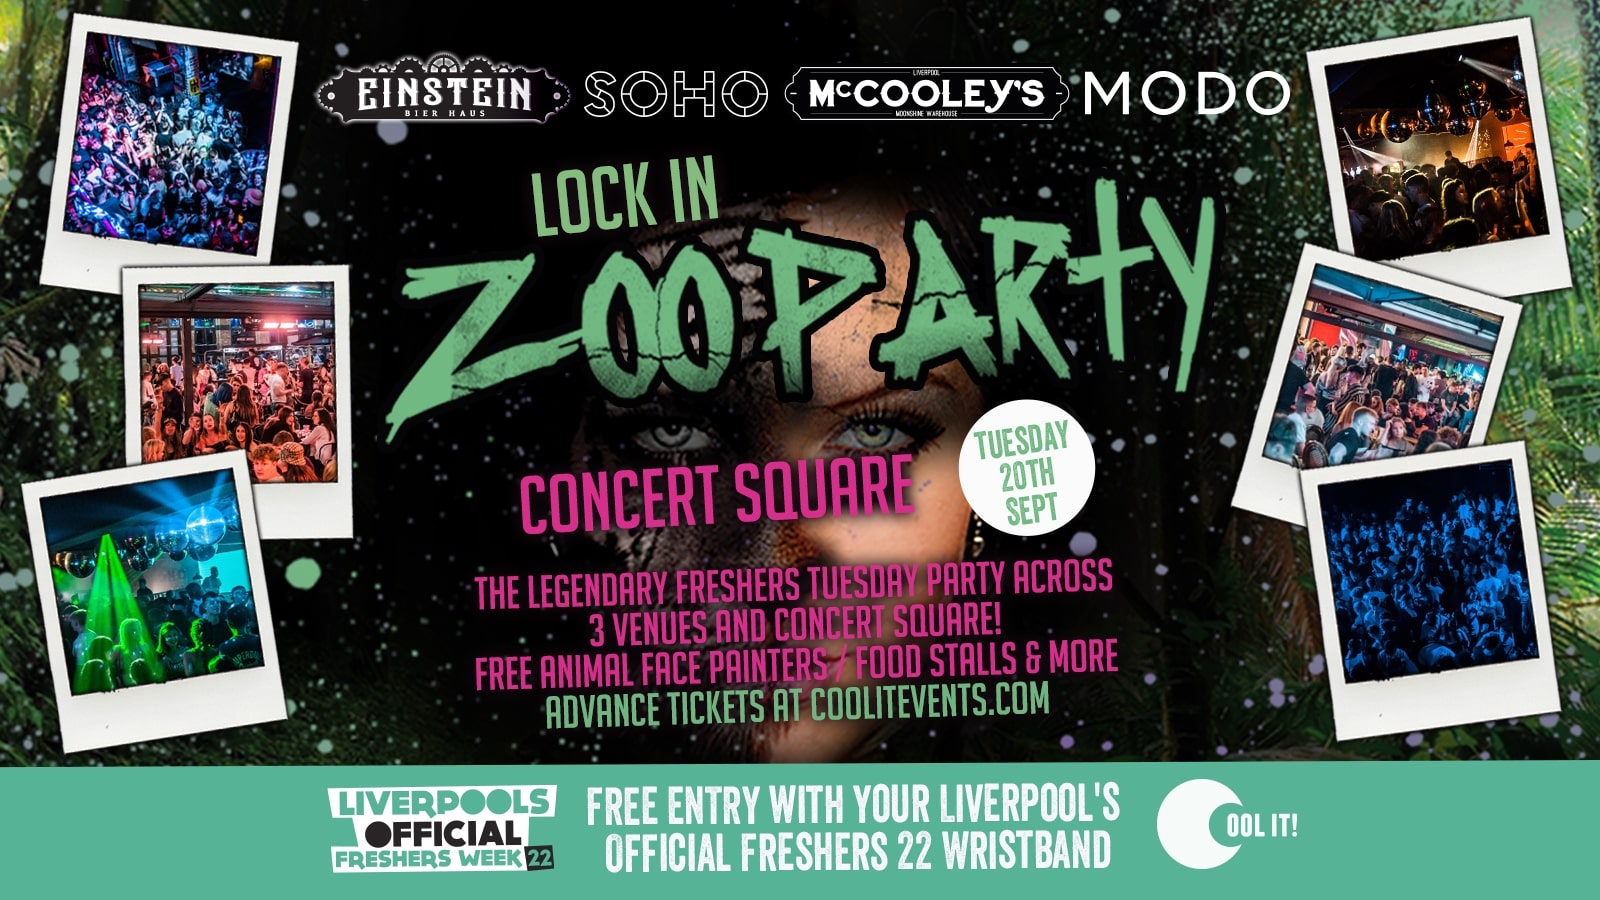 Day 3 – Freshers Lock In Zoo Party Party -FREE ENTRY WITH YOUR OFFICIAL FRESHERS WRISTBAND